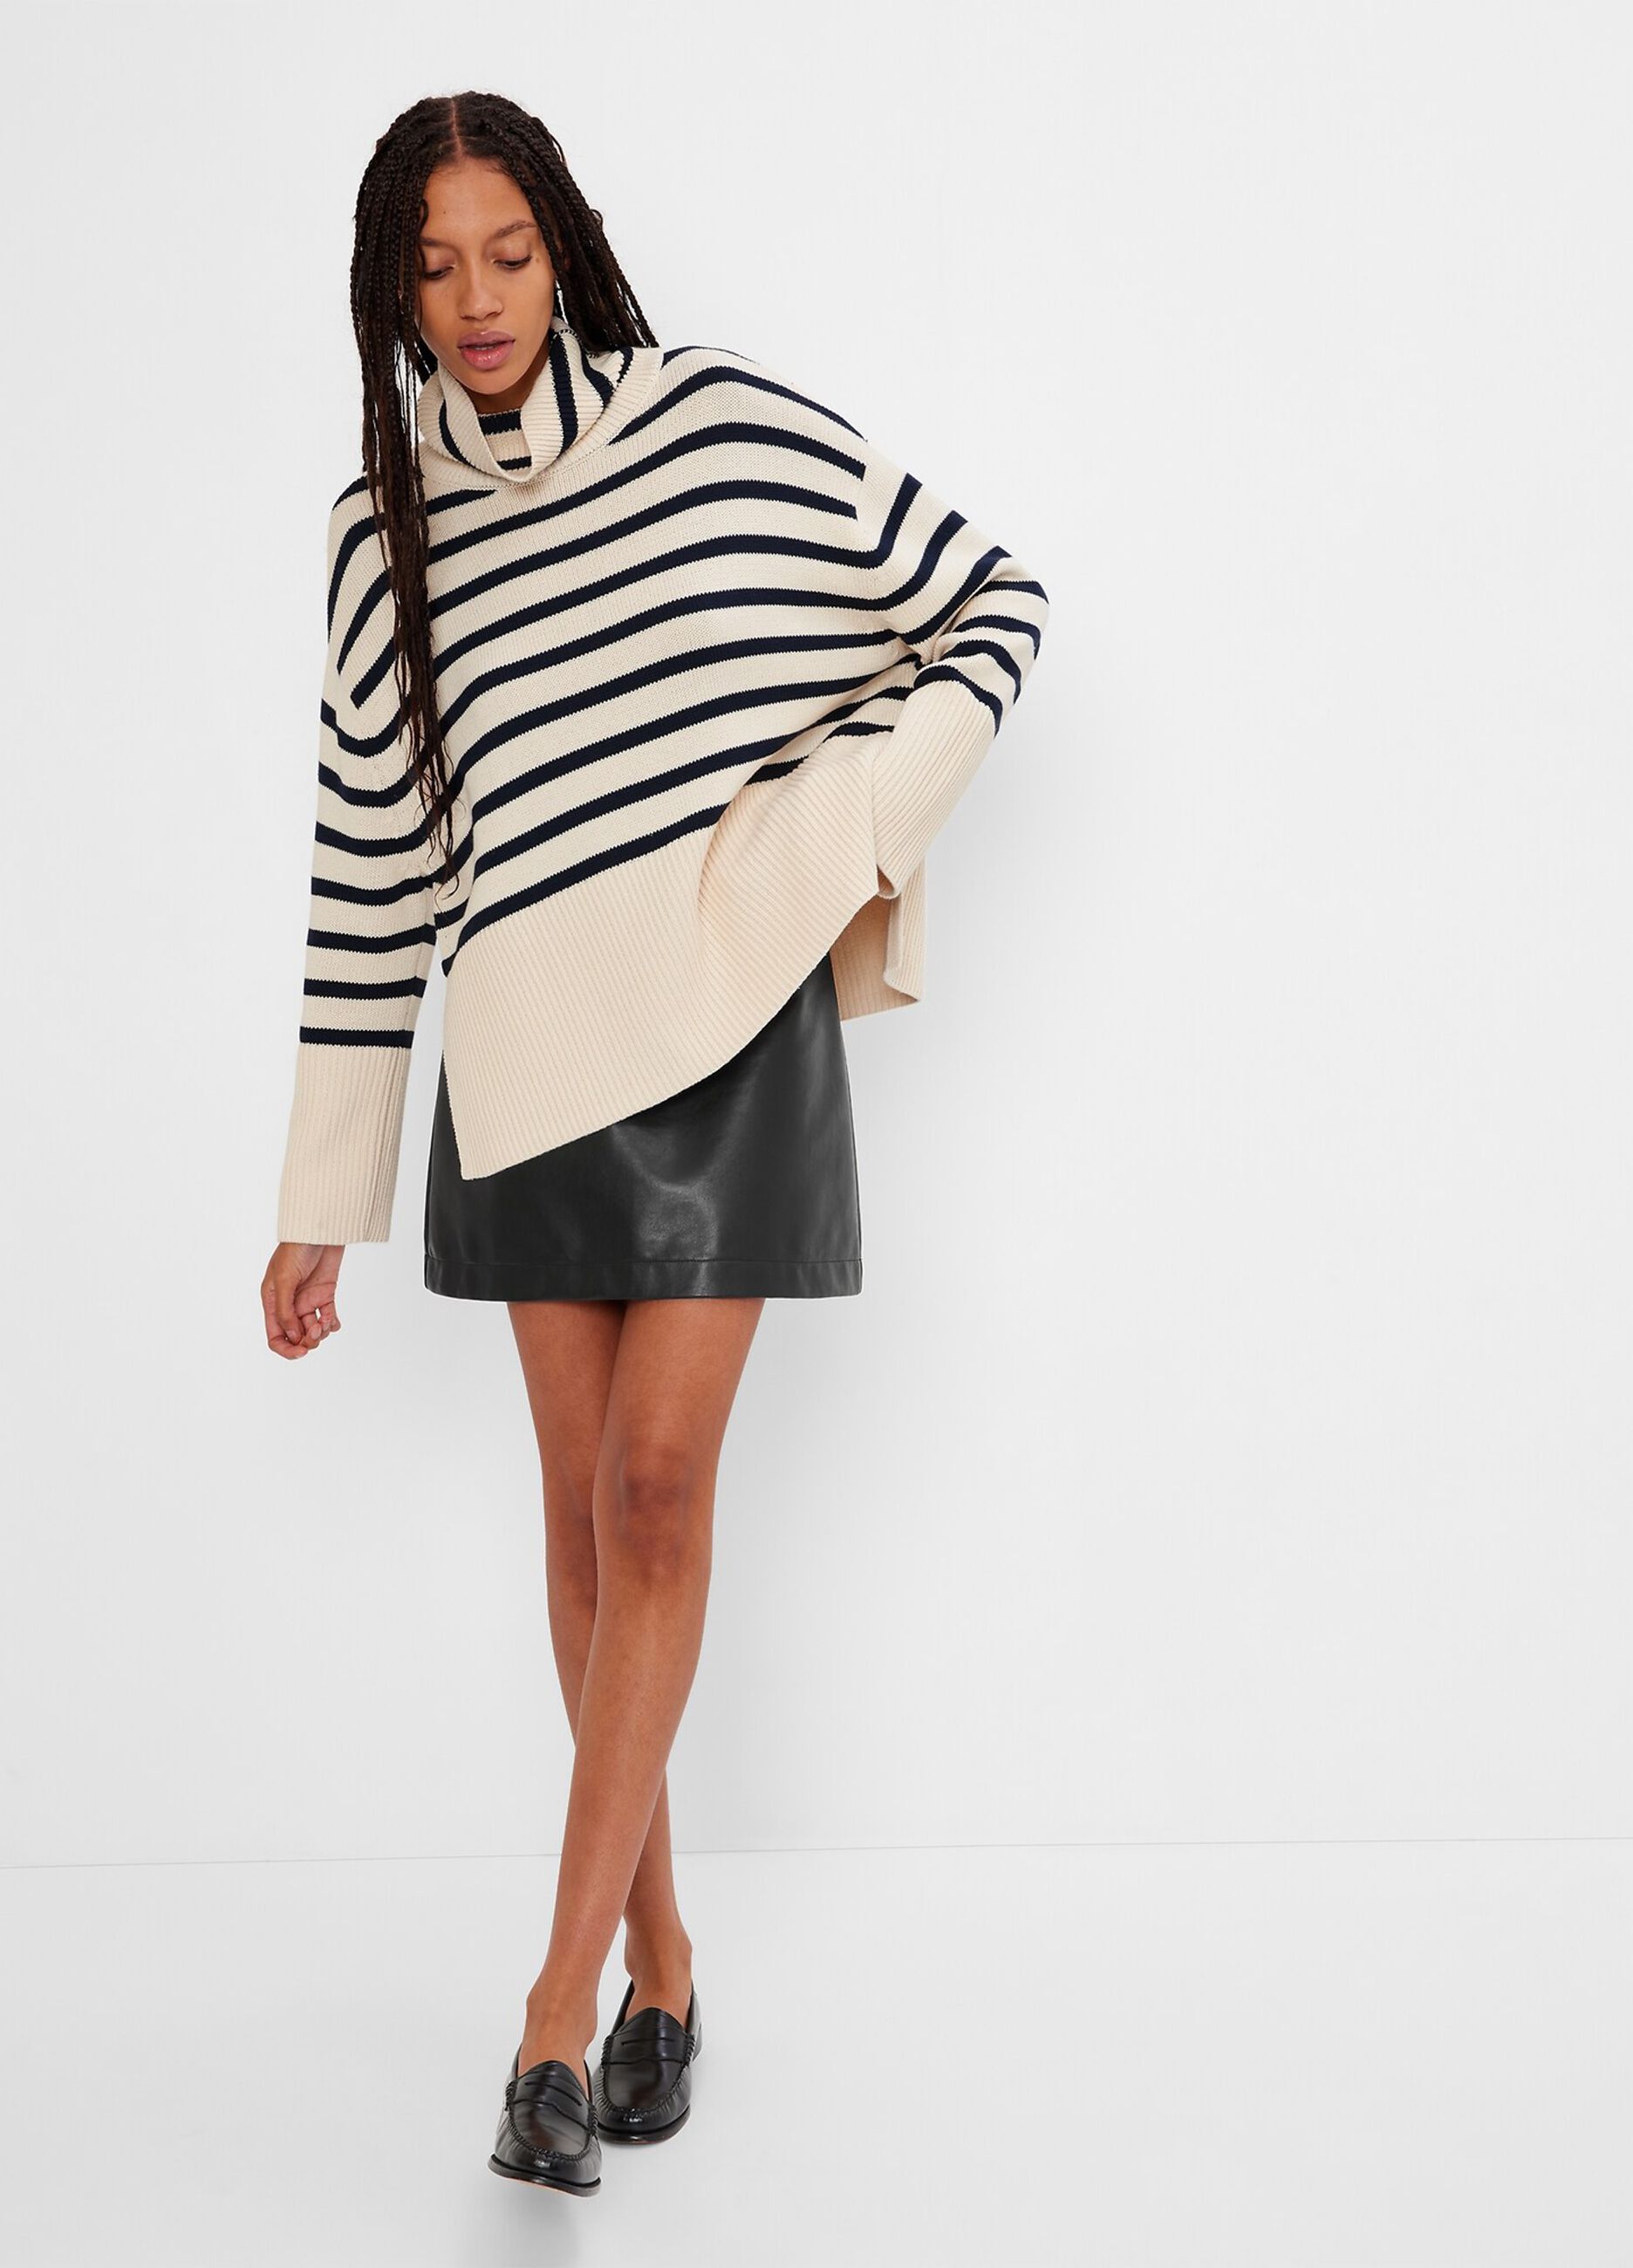 Oversize striped pullover with splits